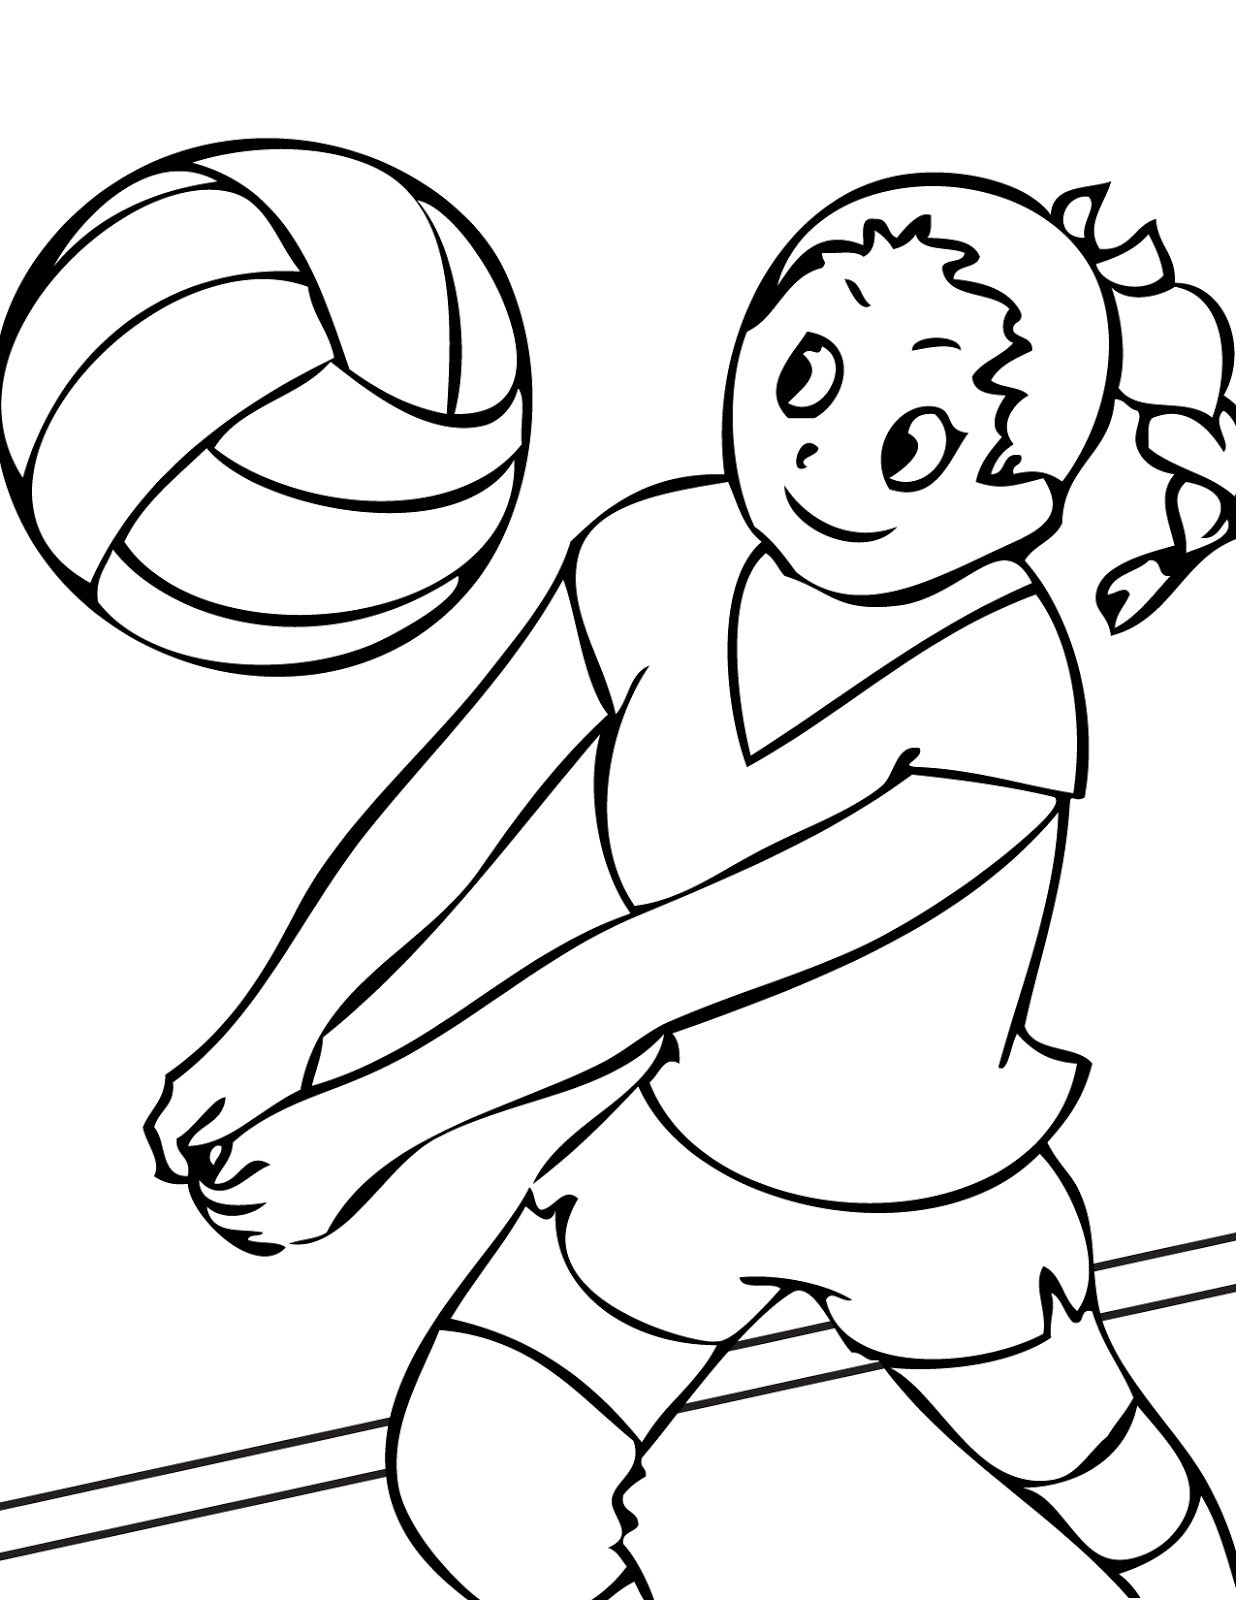 Sports Coloring Pages Printable
 Sports Coloring Pages For Kids